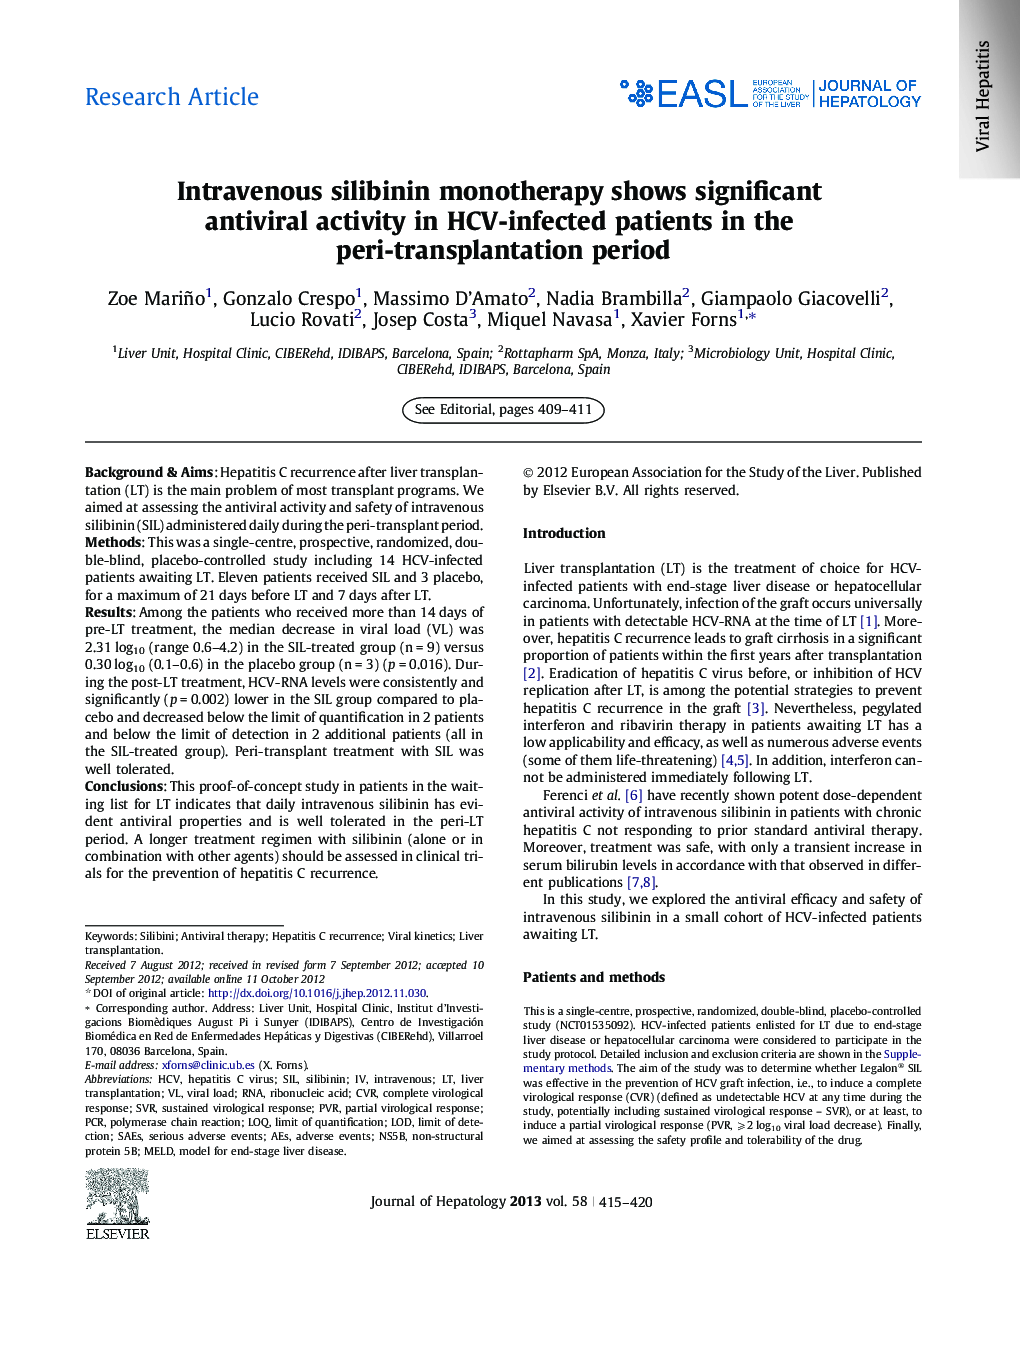 Research ArticleIntravenous silibinin monotherapy shows significant antiviral activity in HCV-infected patients in the peri-transplantation period